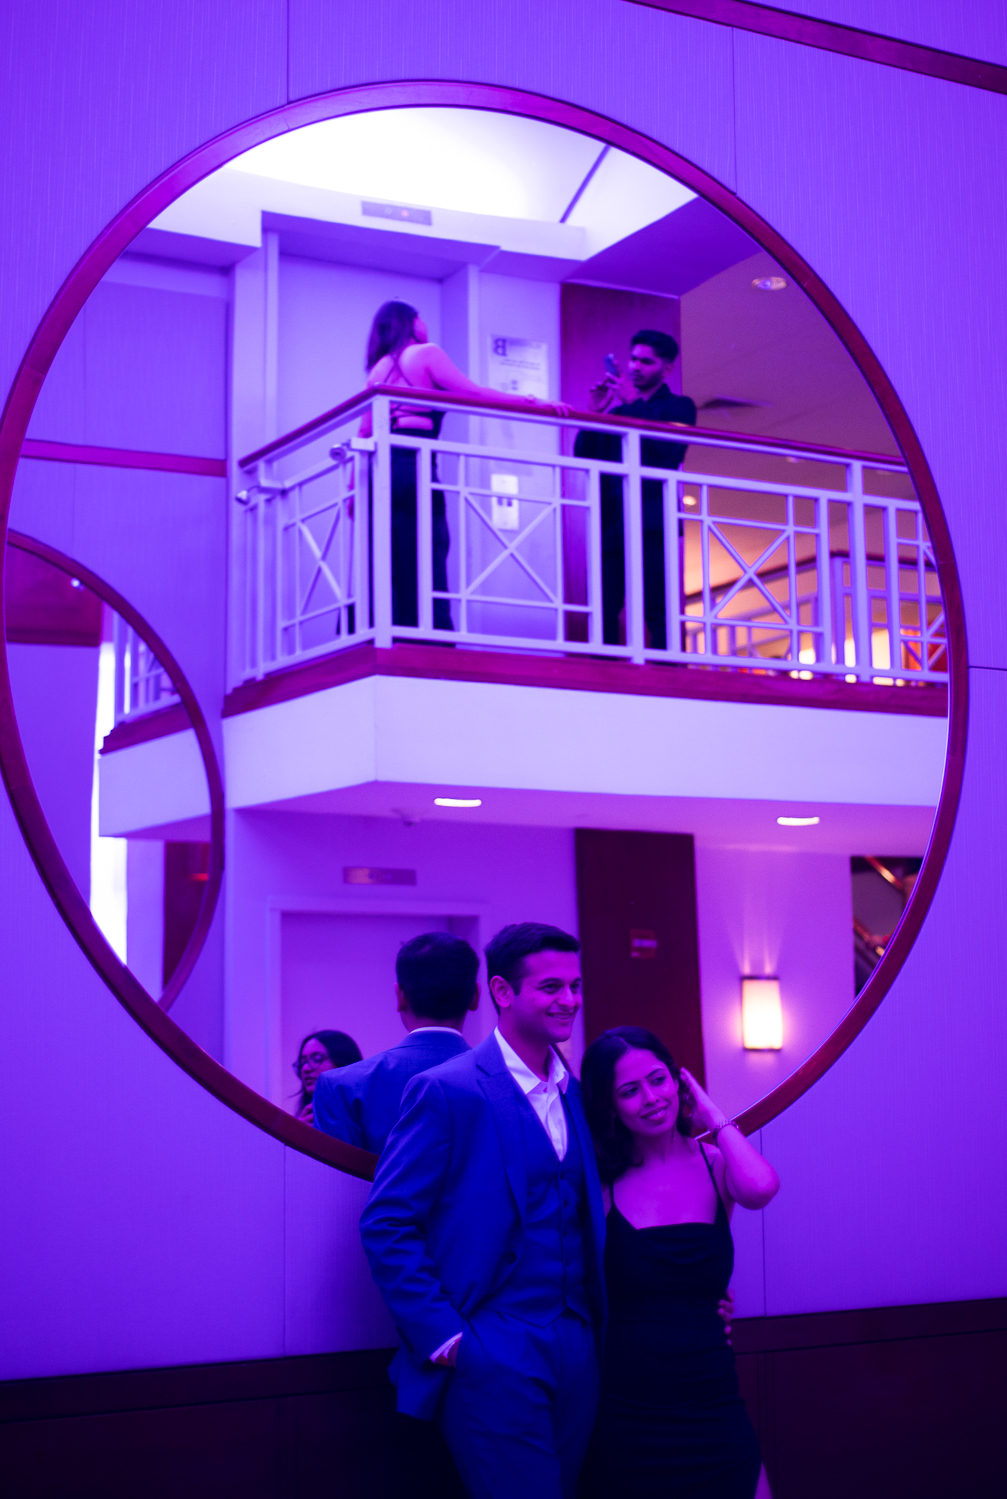 A man in a tuxedo and a woman in a dress pose side by side in front of a large, circular mirror, facing away from it. Through the mirror, the back of a woman leaning against a balcony railing corner, posing for a photo being taken by a man, is visible. The room is basked in blue-ish purple light.